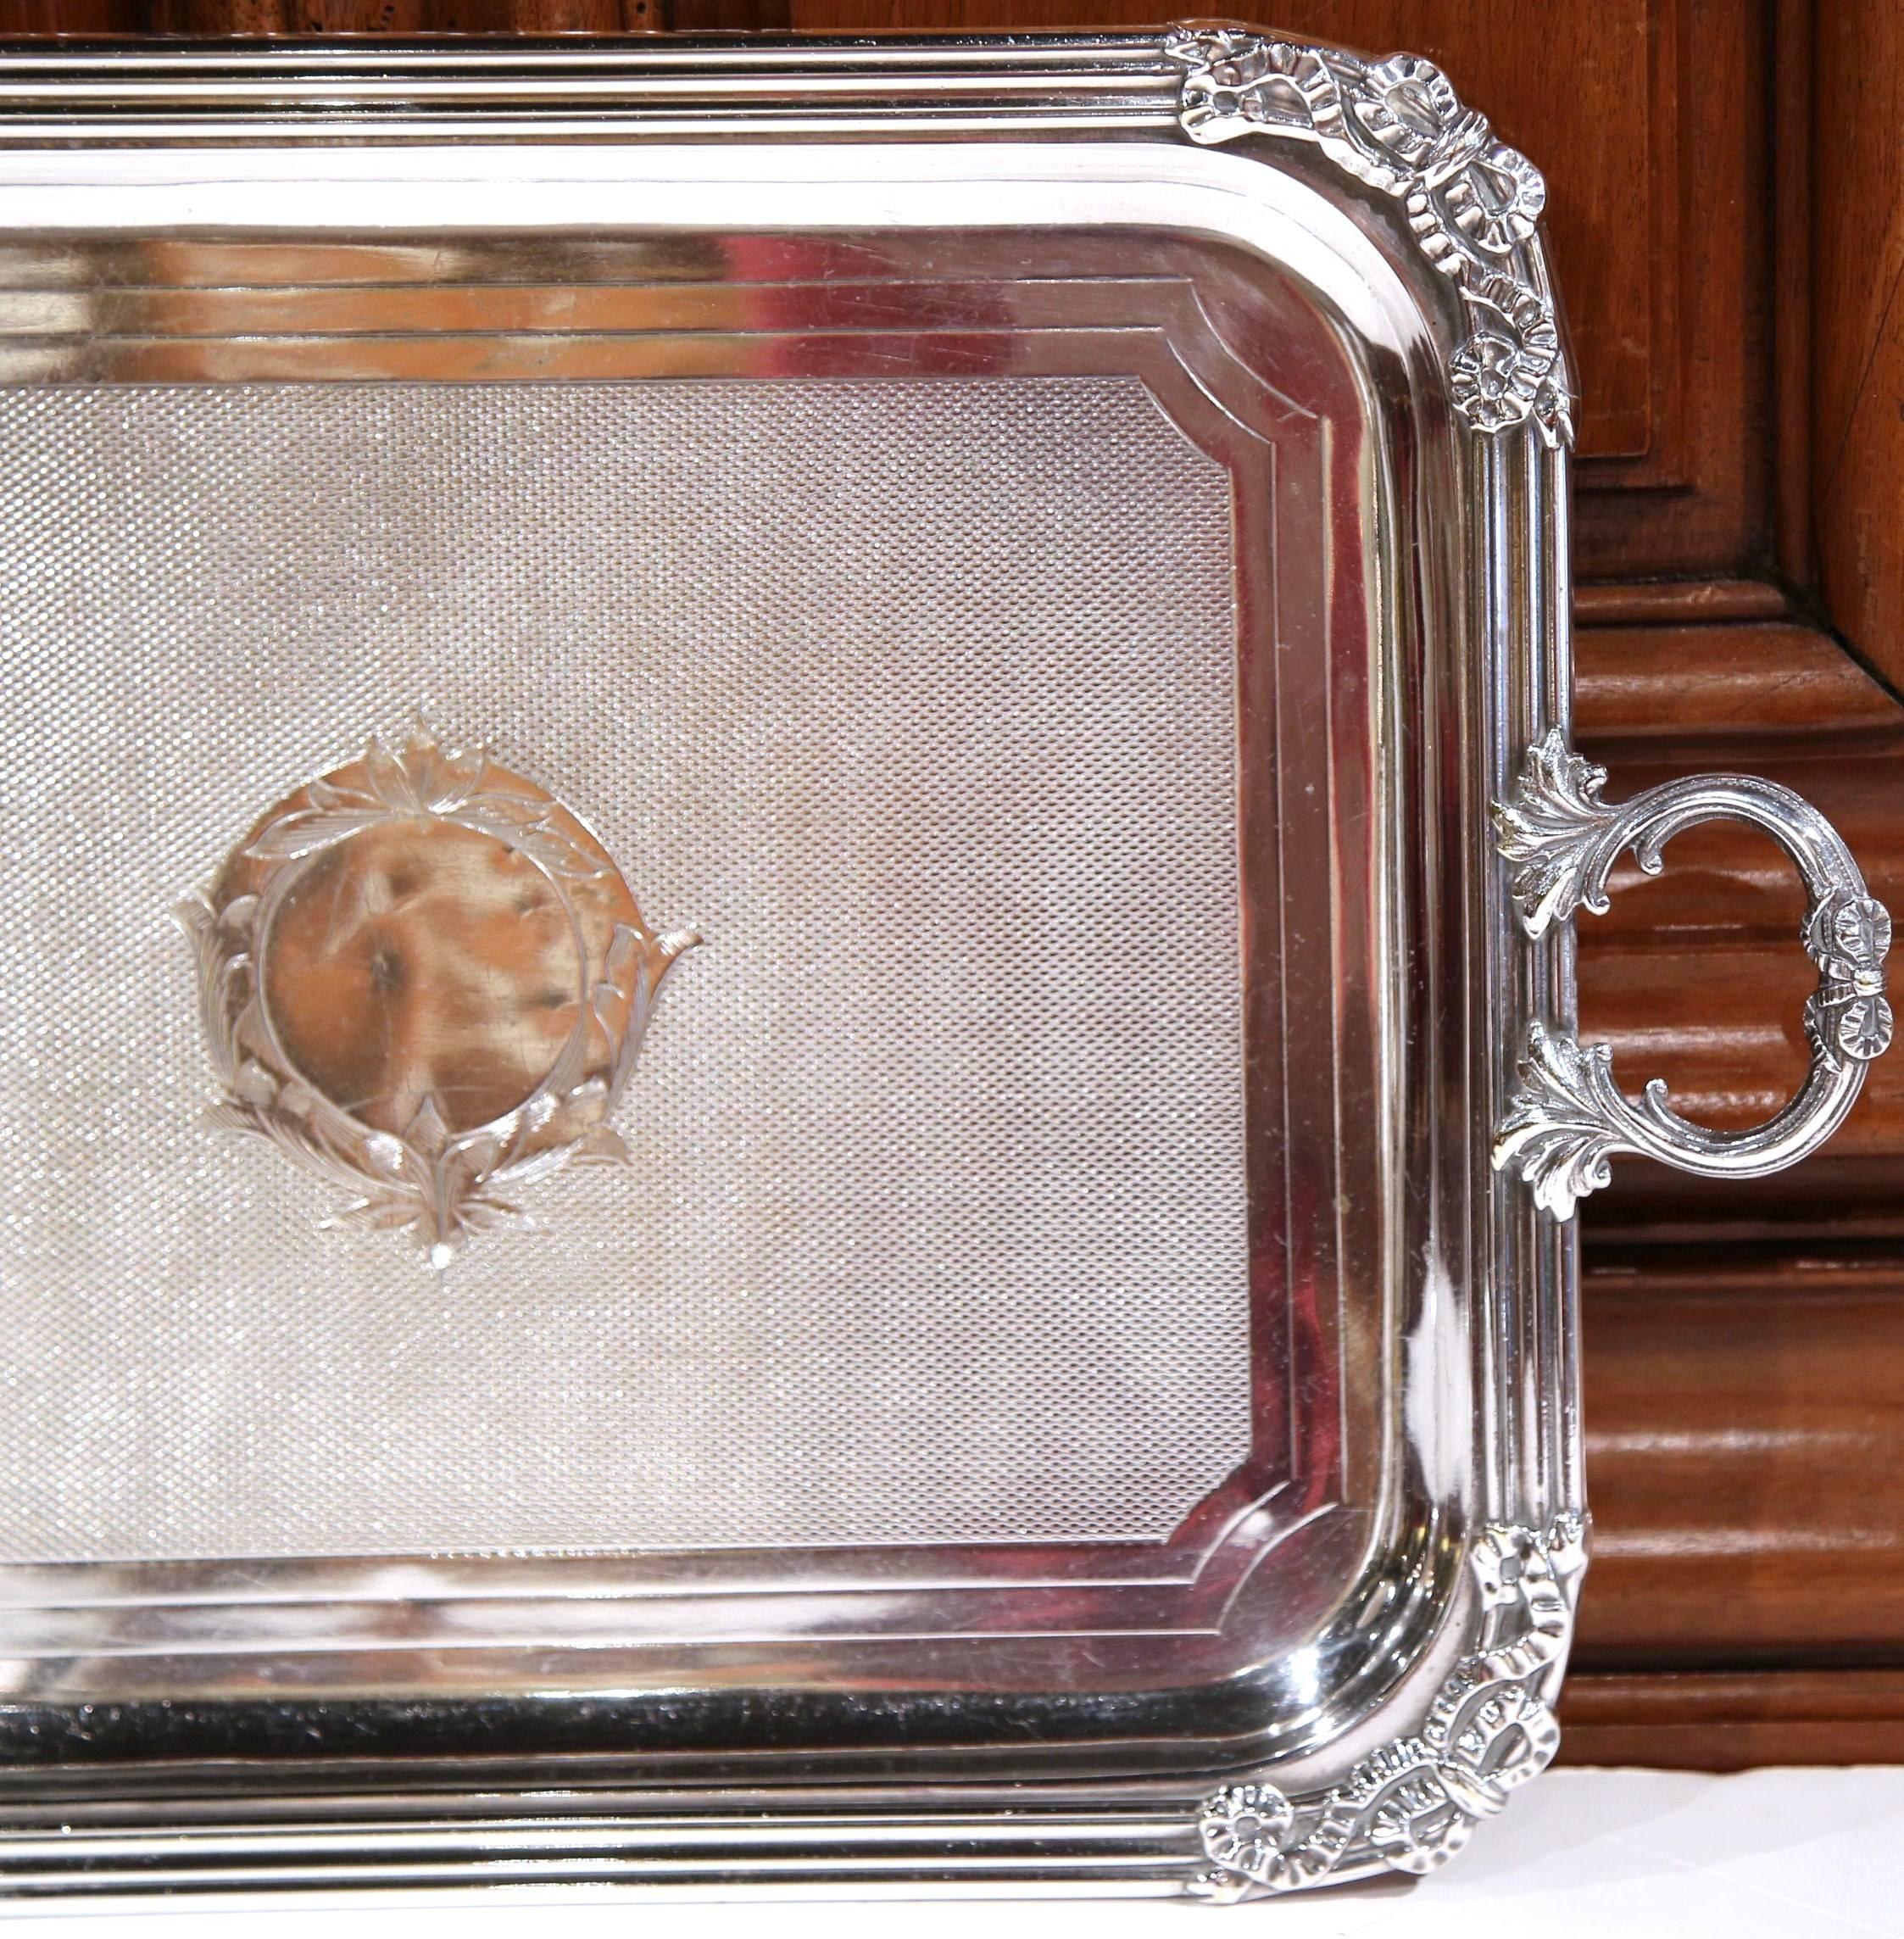 Repoussé 19th Century French Louis XVI Silver Plated Tray with Repousse Decor and Handles For Sale